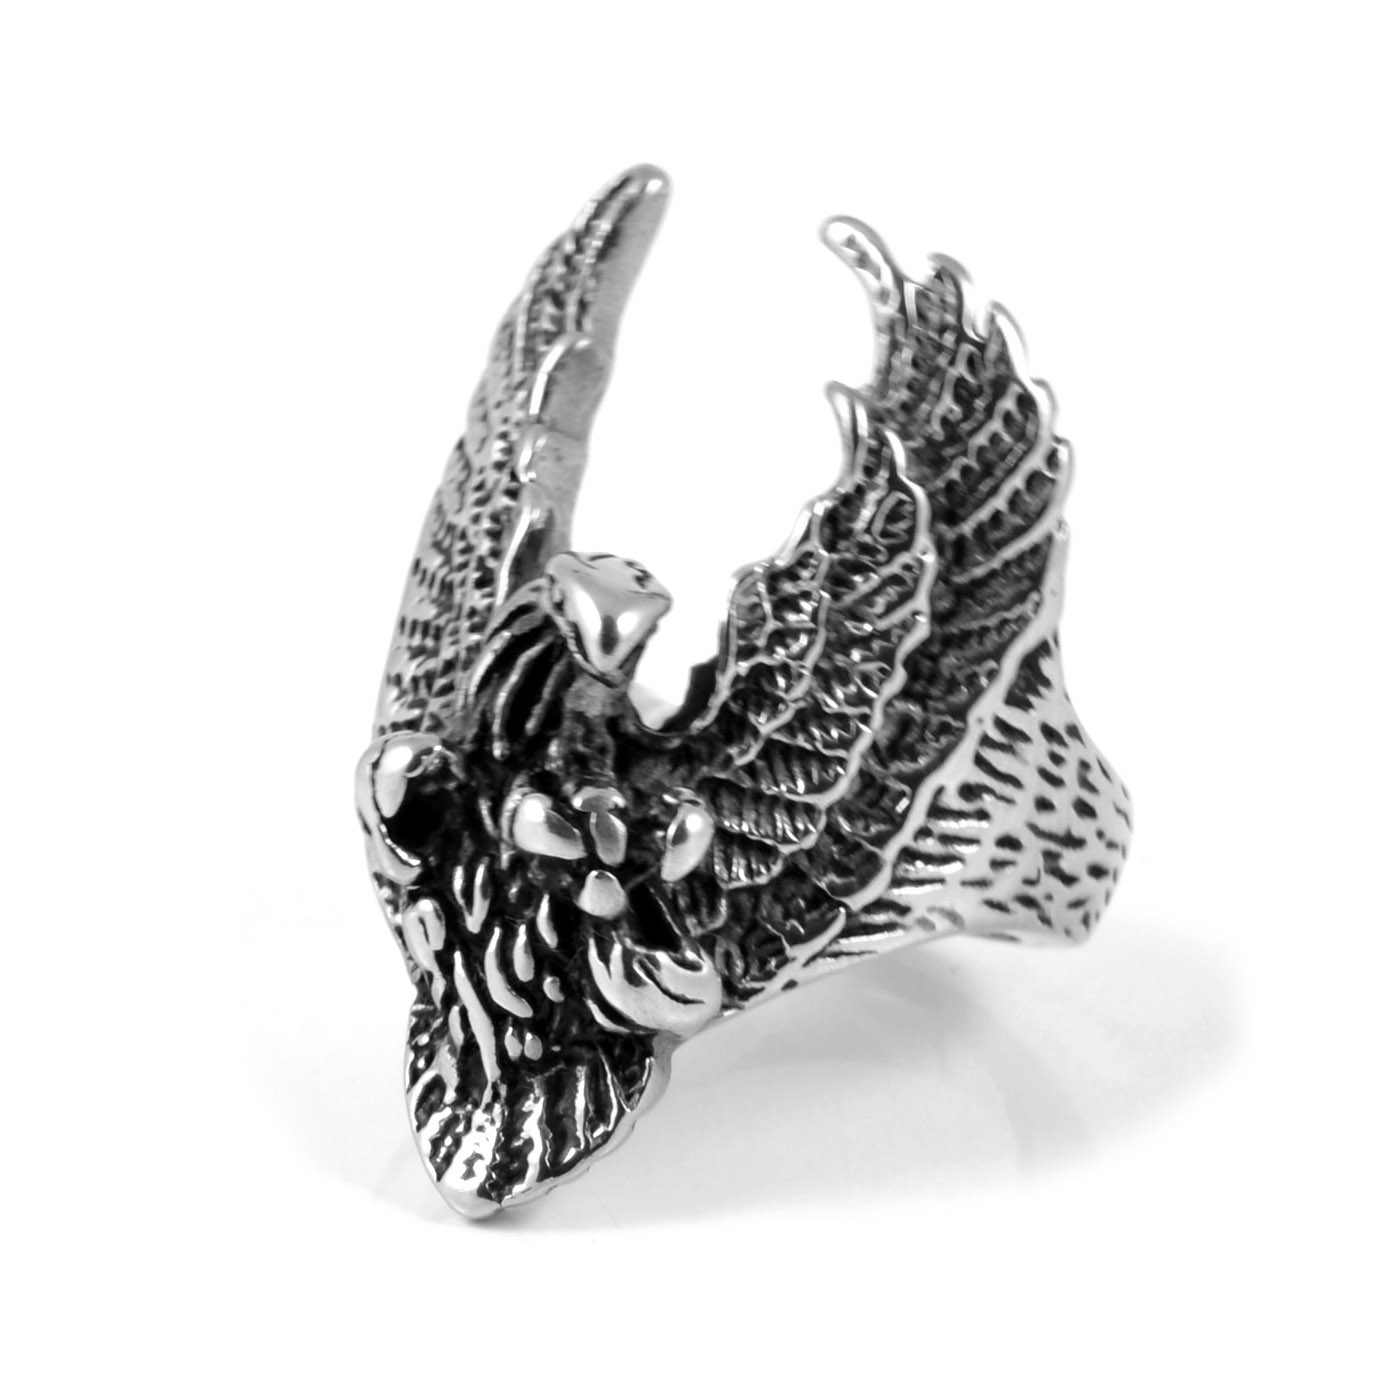 3D Eagle Ring Mens 925 Sterling Silver » Anitolia